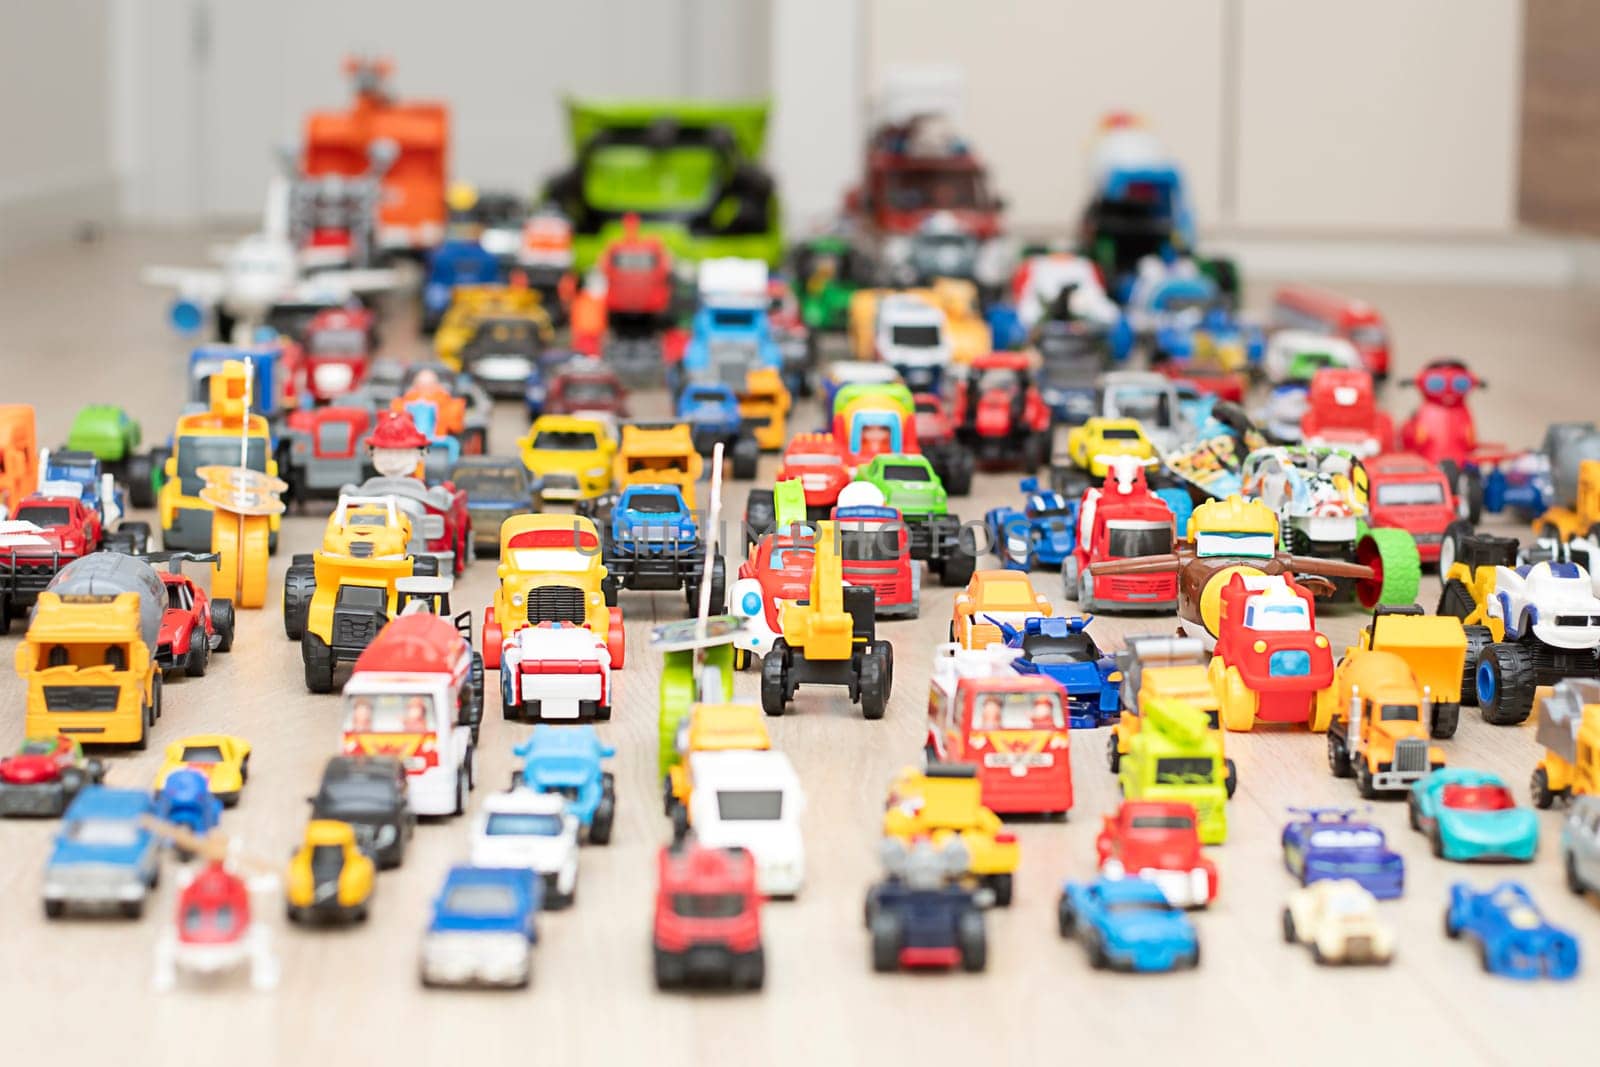 Toy cars, motorcycles, tractors, buses, pickups, many colorful small and large cars are arranged for play on the floor in the children's room. by ketlit